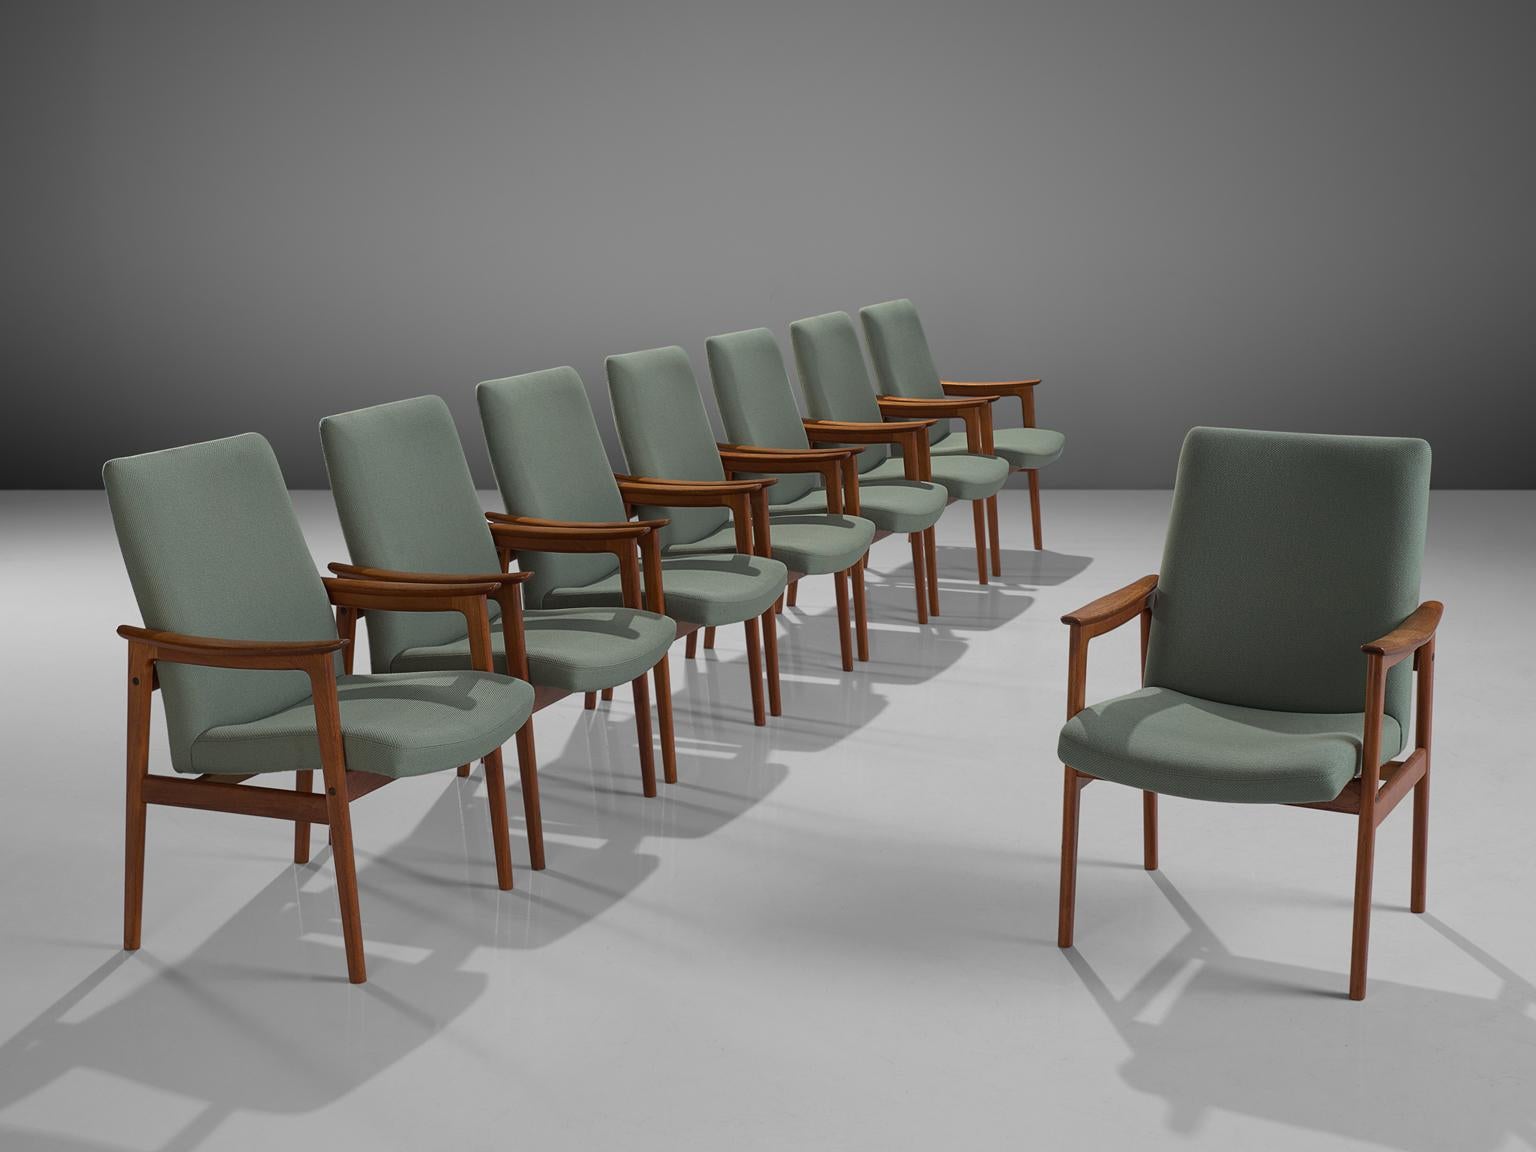 Set of eight armchairs, teak and mint green fabric, Scandinavia, 1950s. 

These elegant teak dining chairs with armrests are both stately and modest. These Scandinavian chairs have a teak frame with a beautiful visible grain. Nicely curved armrests